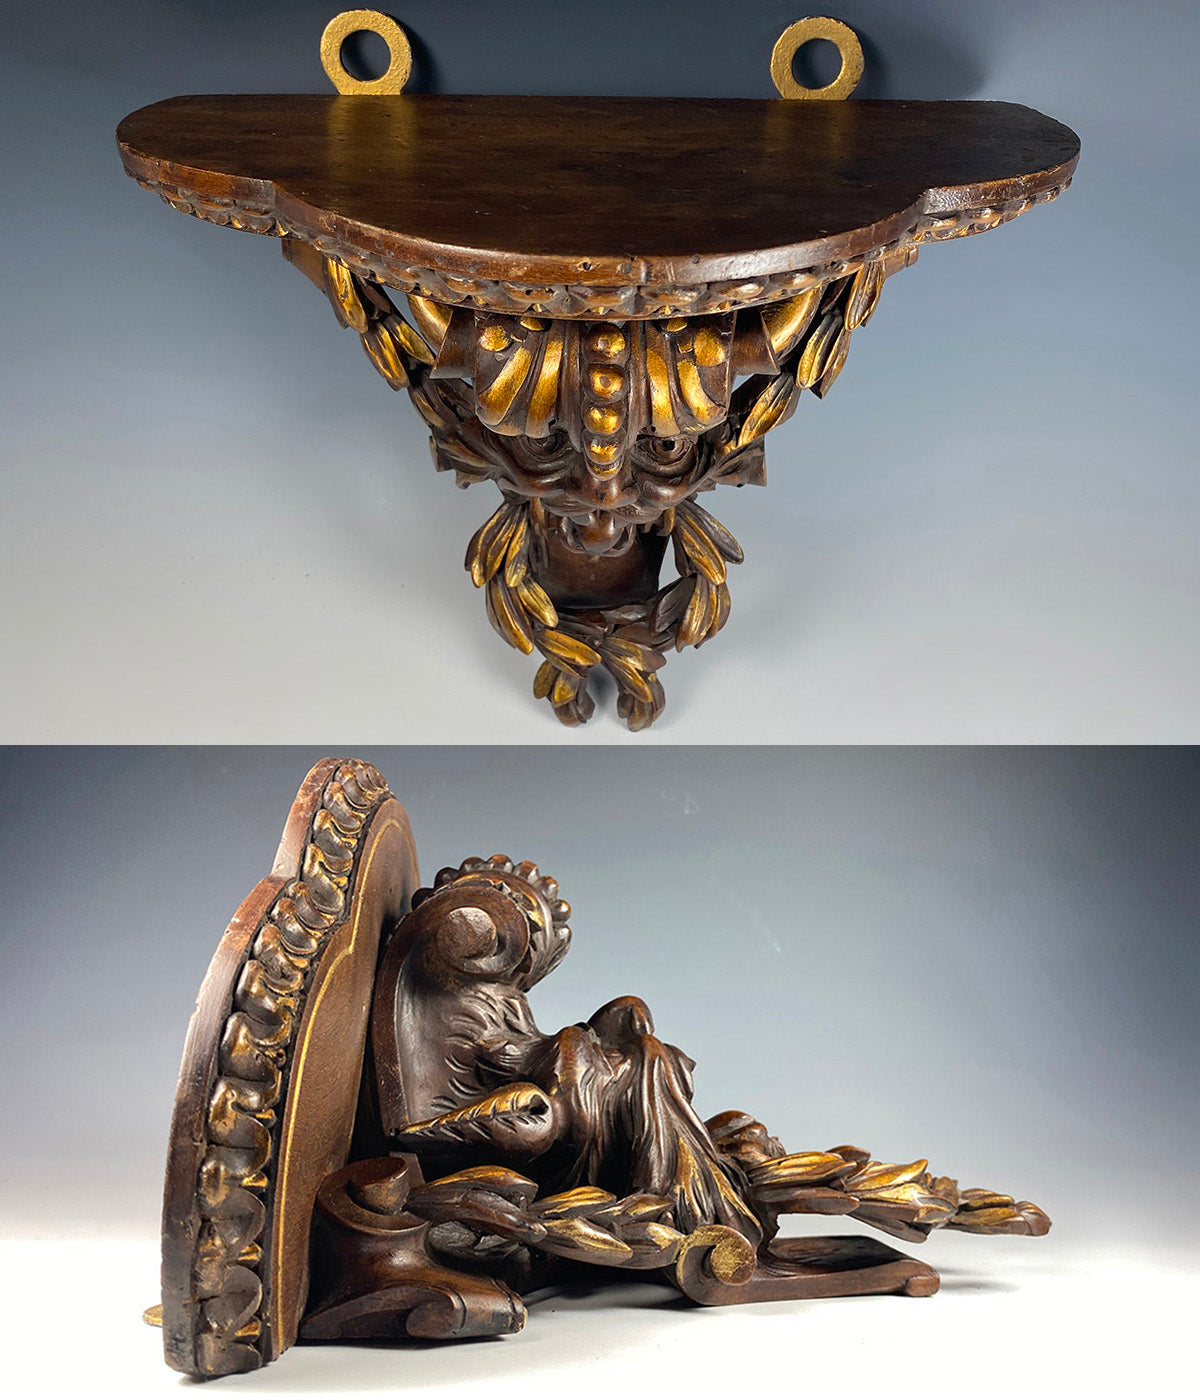 Antique Hand Carved Neoclassical Figural Bracket Shelf, 11.75" x 9.75", Black Forest or Italy